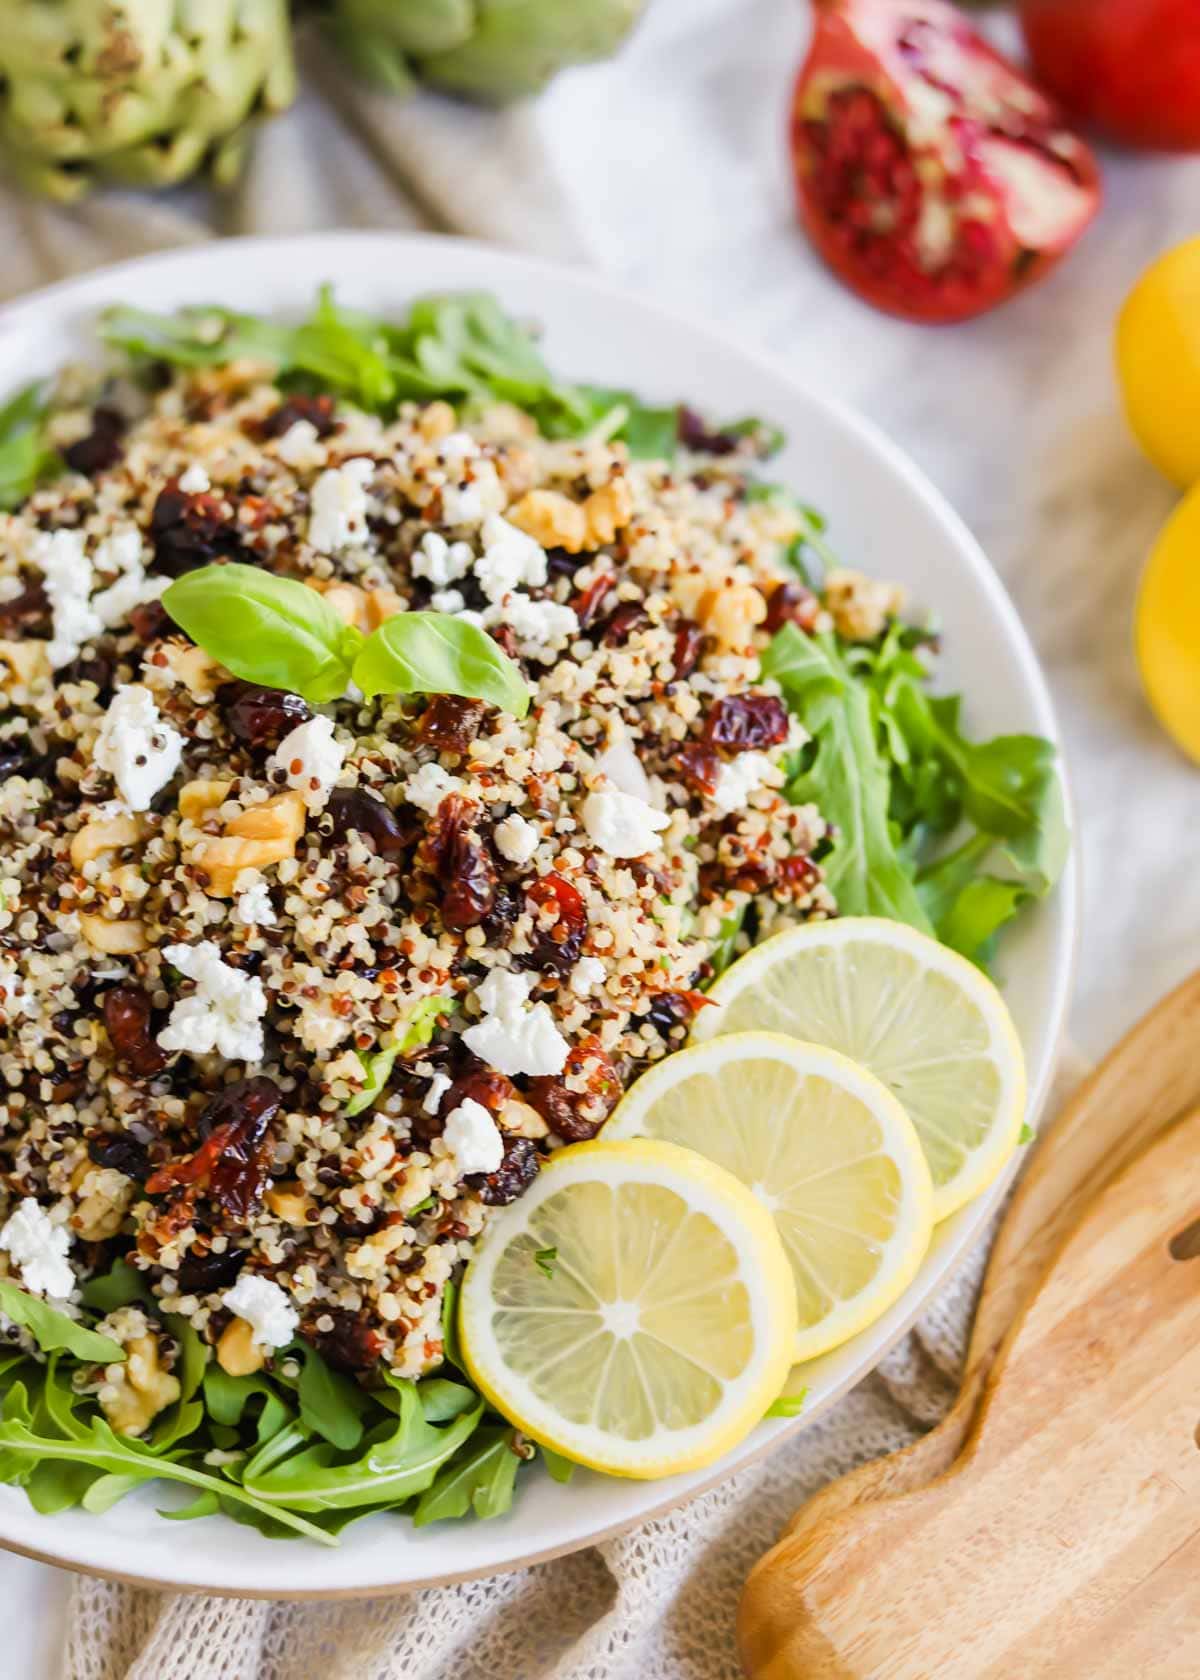 Harvest Salad with Quinoa and Arugula and lemon slices on plate.